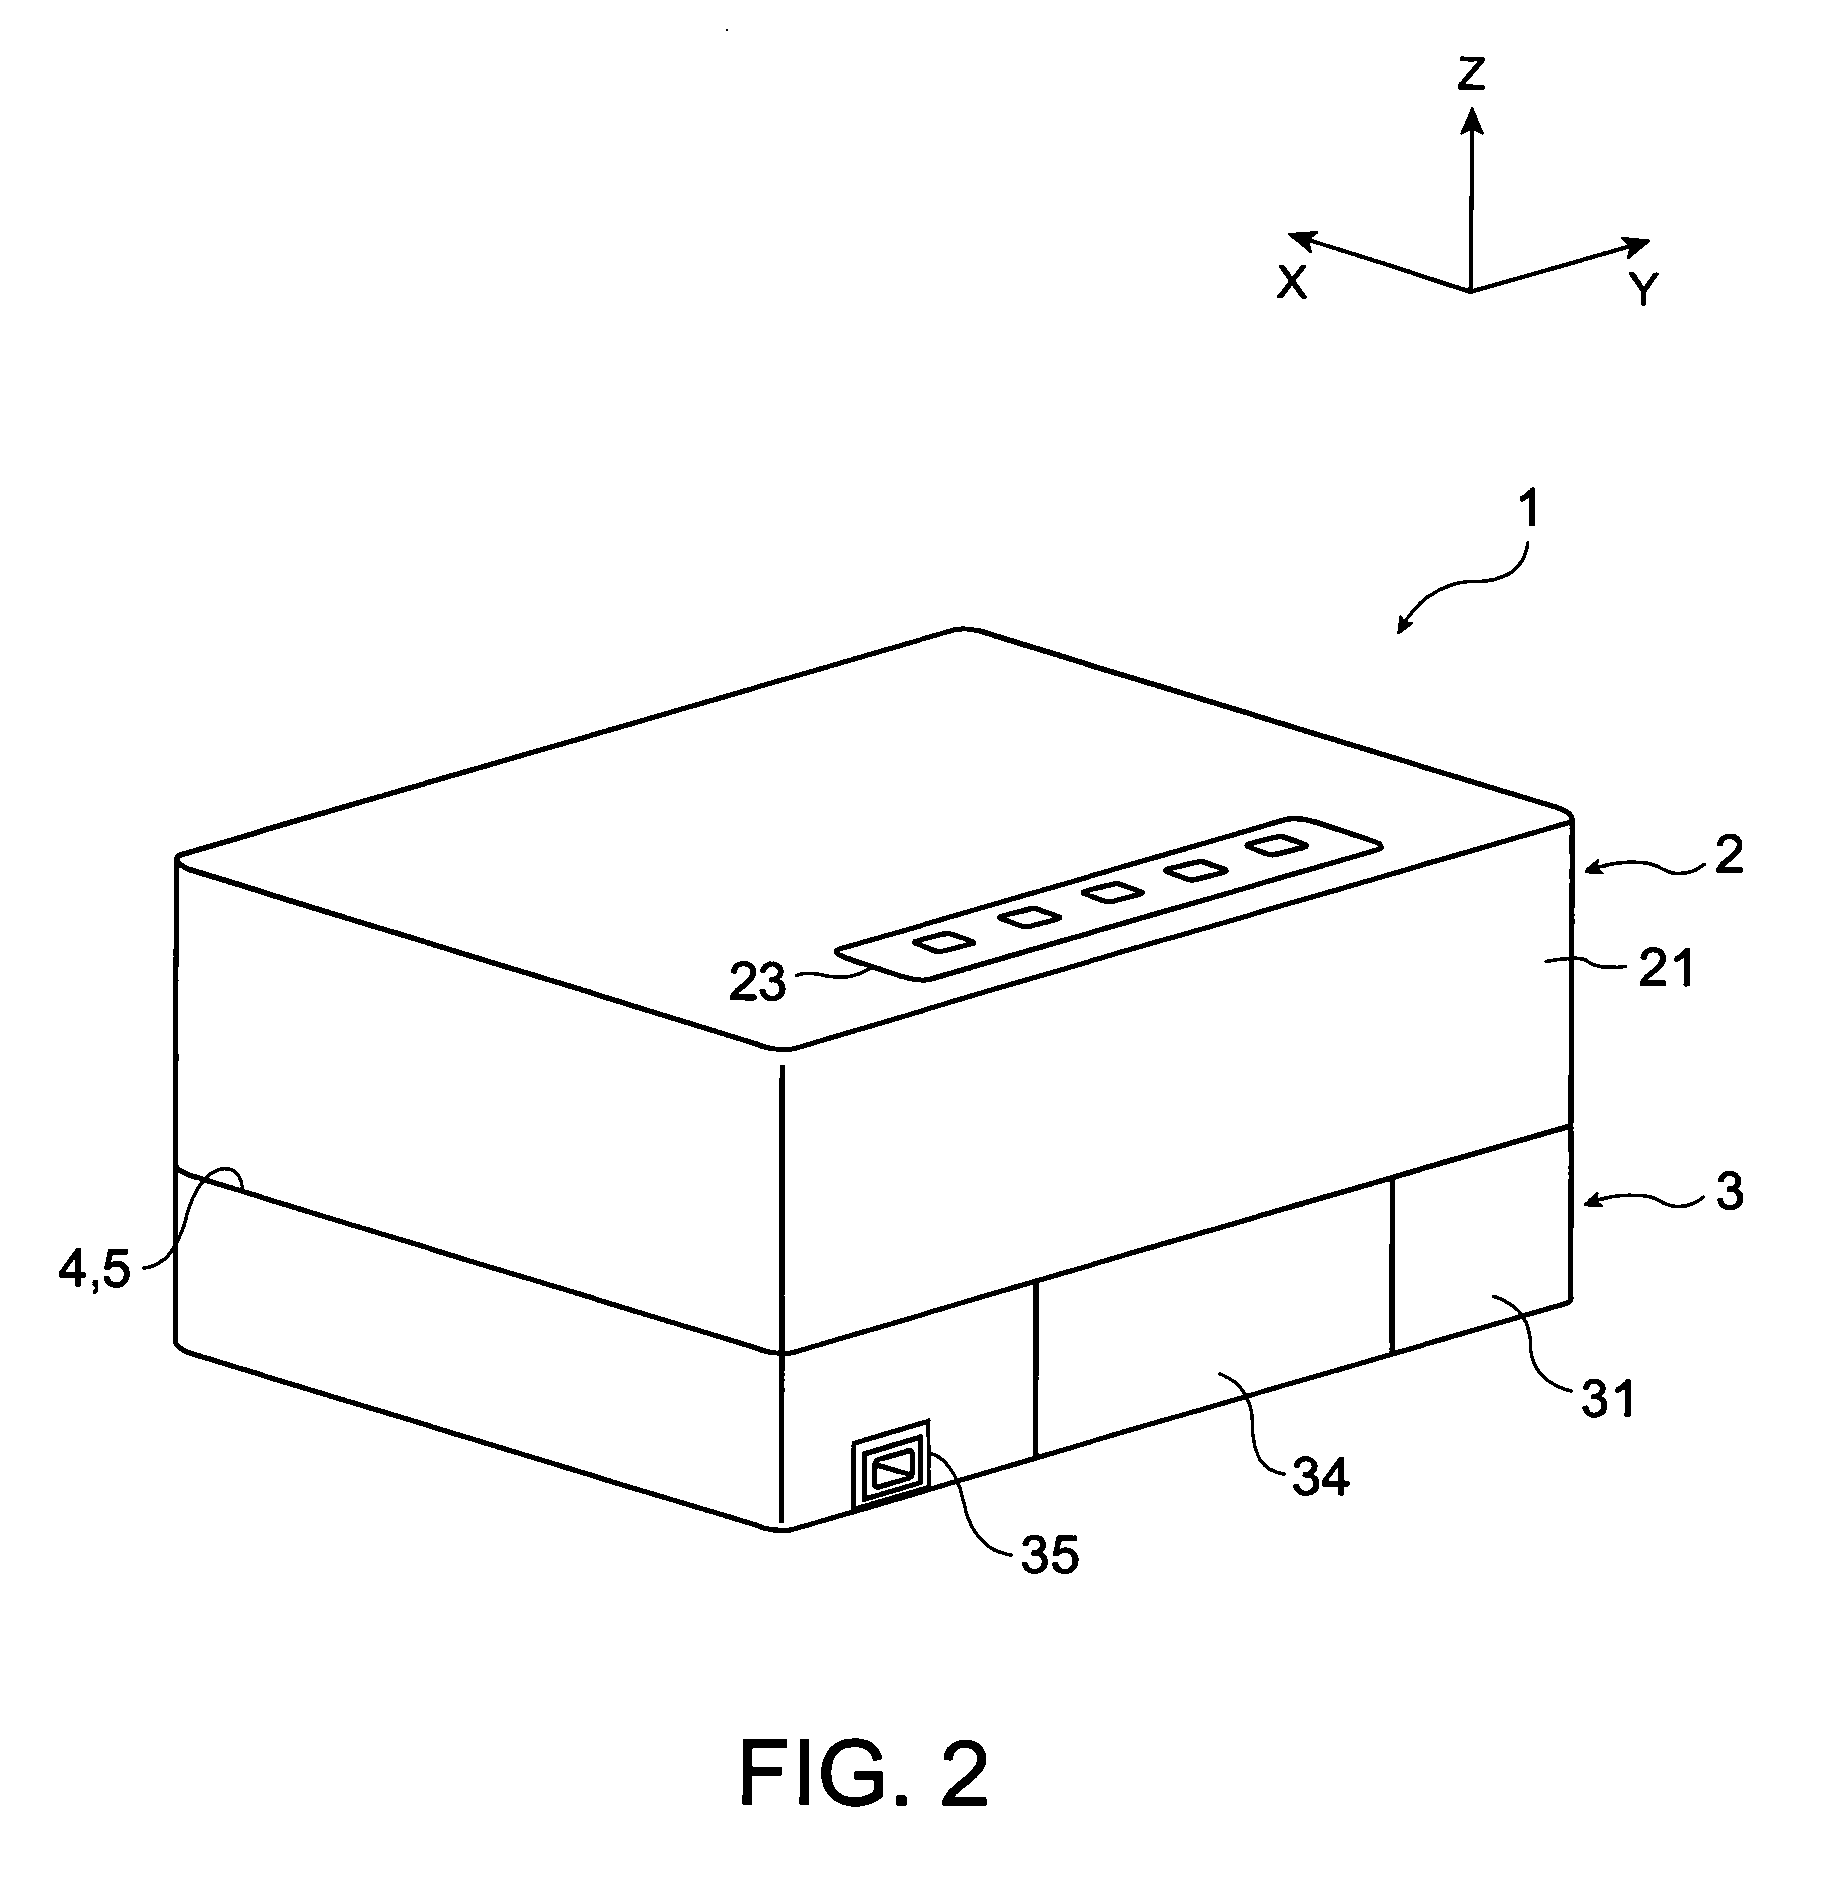 Projector including a connection mechanism rotatably connecting a projector main body to an image output device